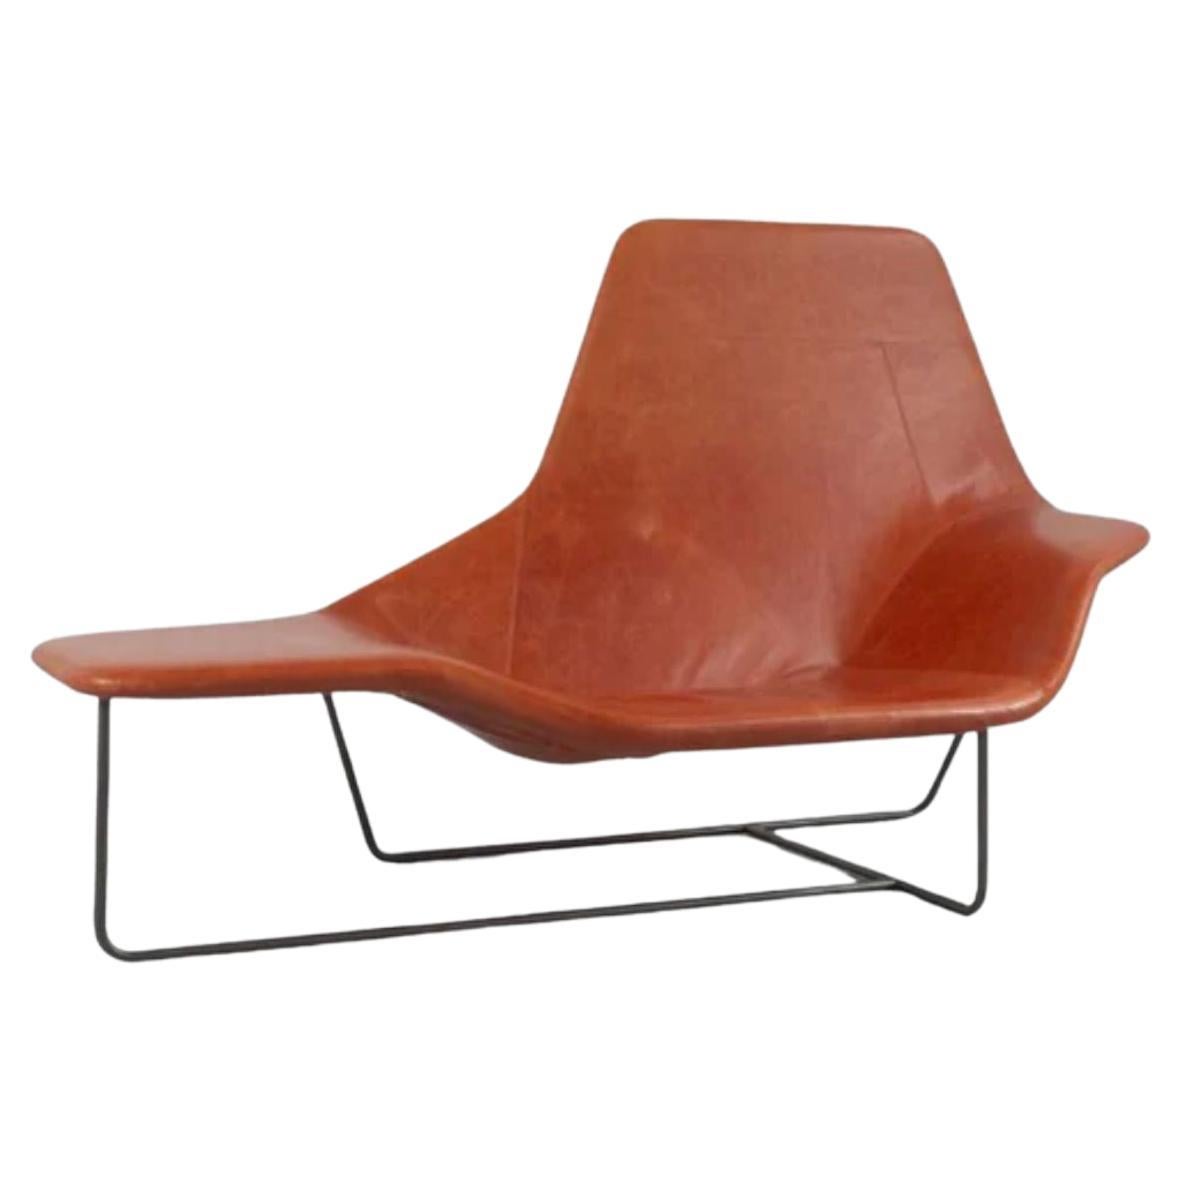 Vintage "Lama" Lounge Chair or Chaise by Ludovica & Roberto Palomba, circa 2000s